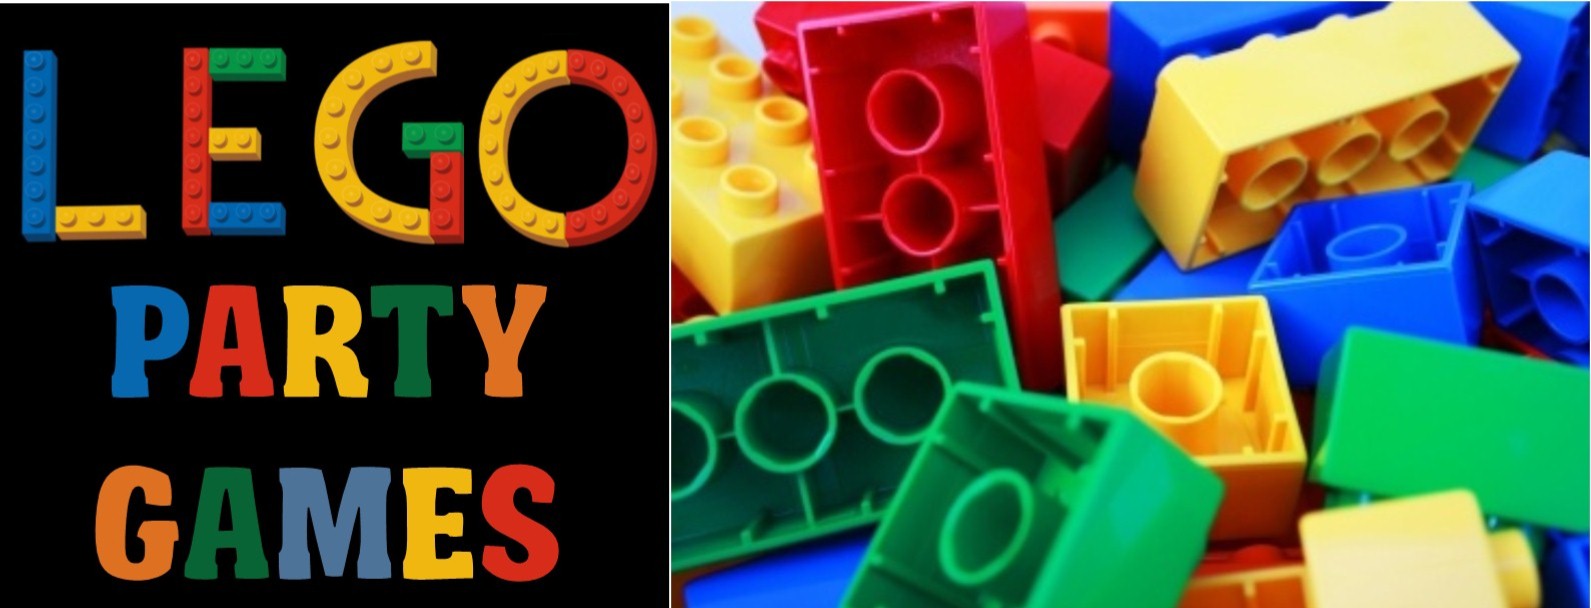 lego party games